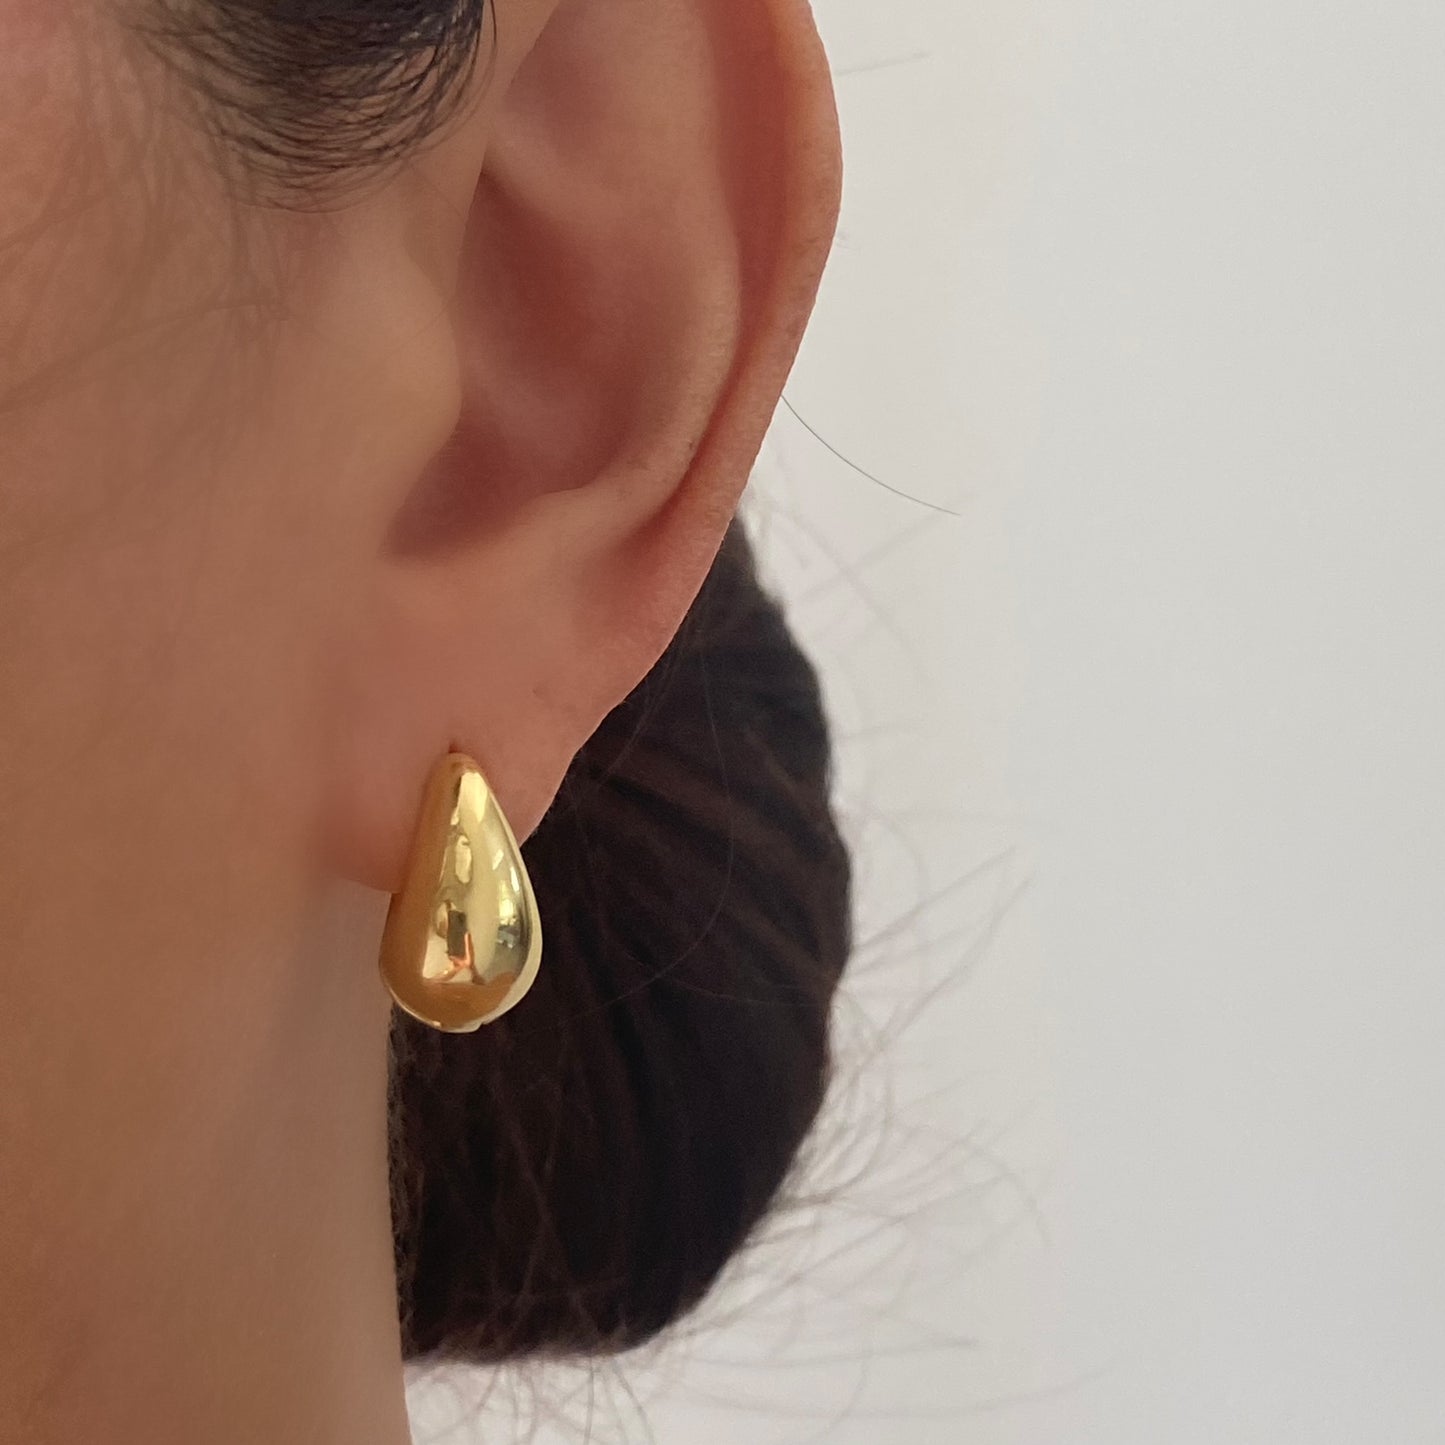 Chunky Gold Hoop Earrings 1cm Thick